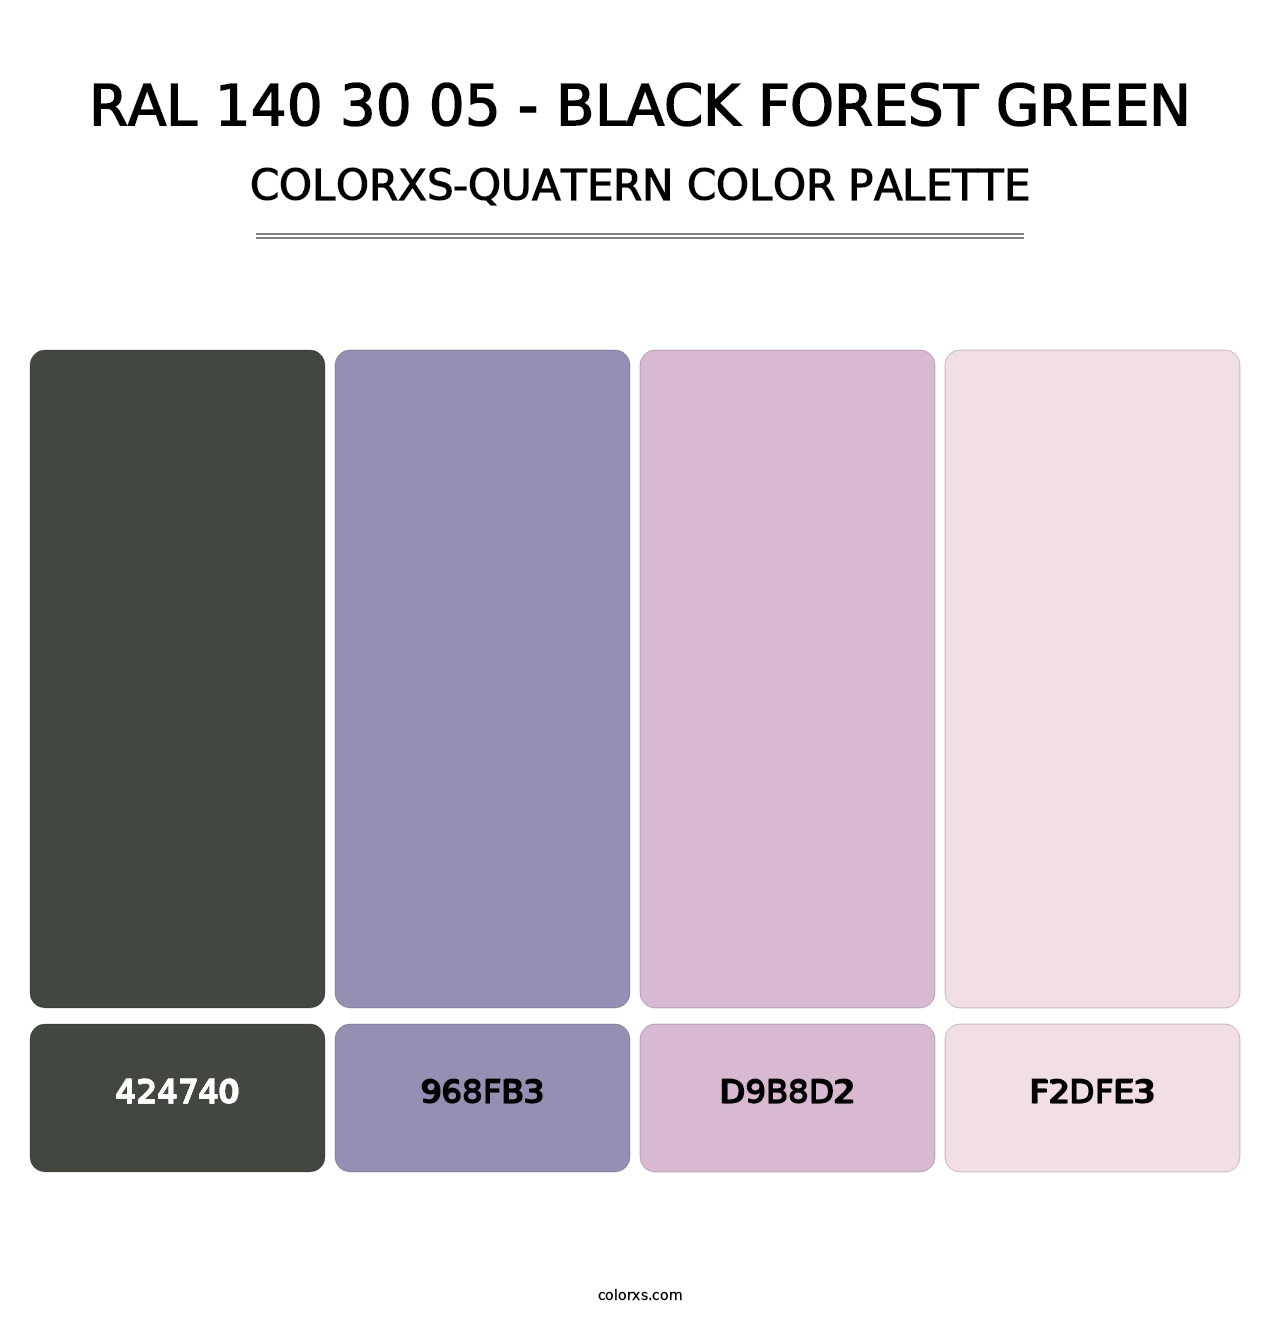 RAL 140 30 05 - Black Forest Green - Colorxs Quatern Palette